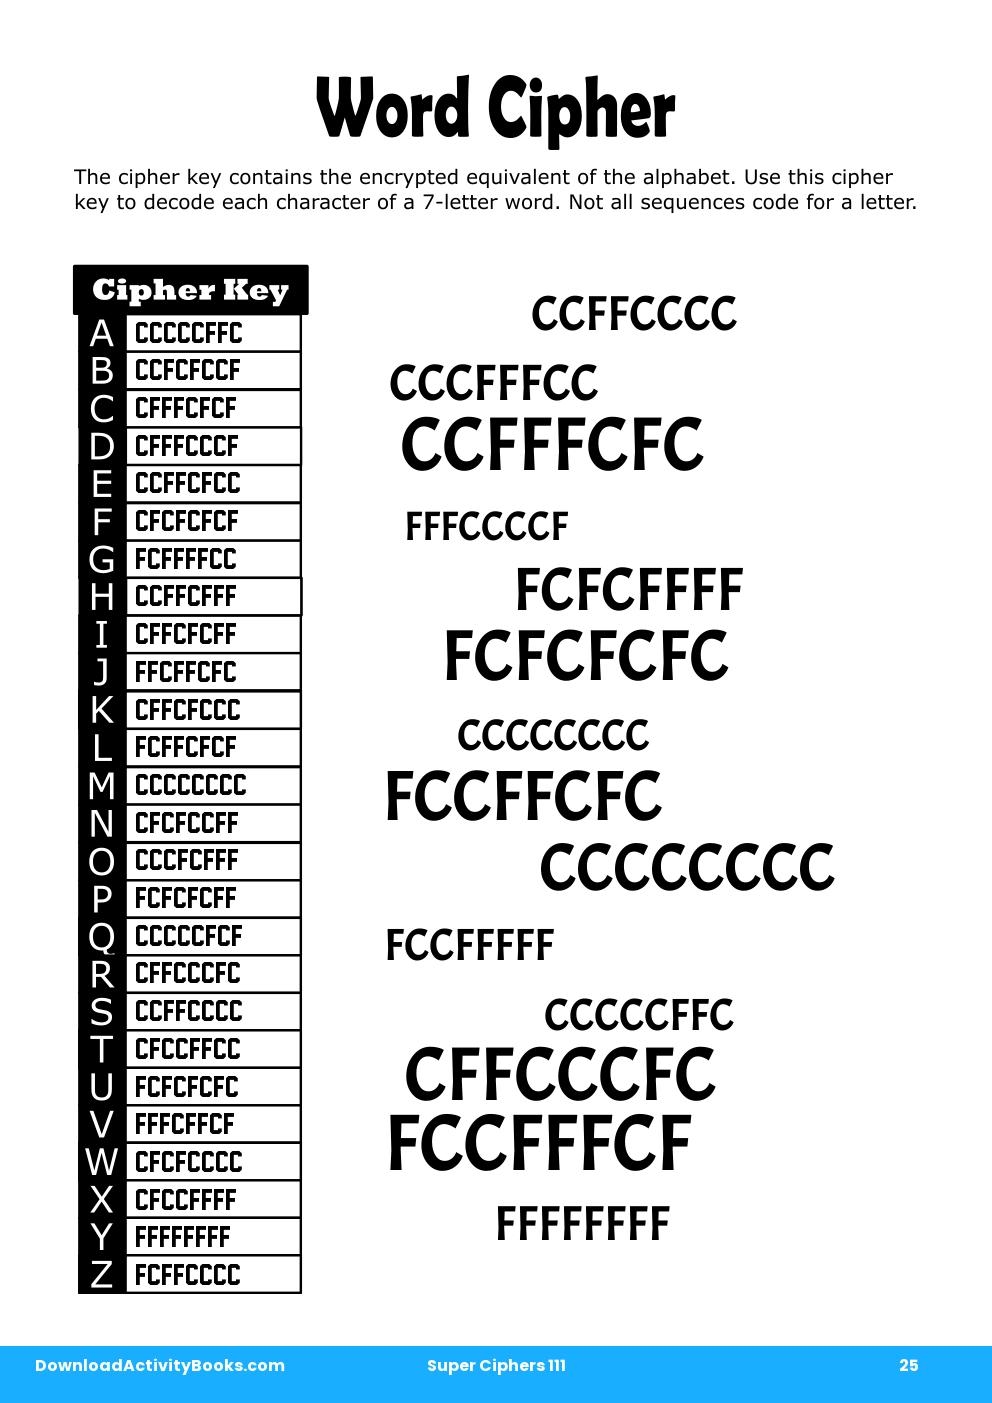 Word Cipher in Super Ciphers 111